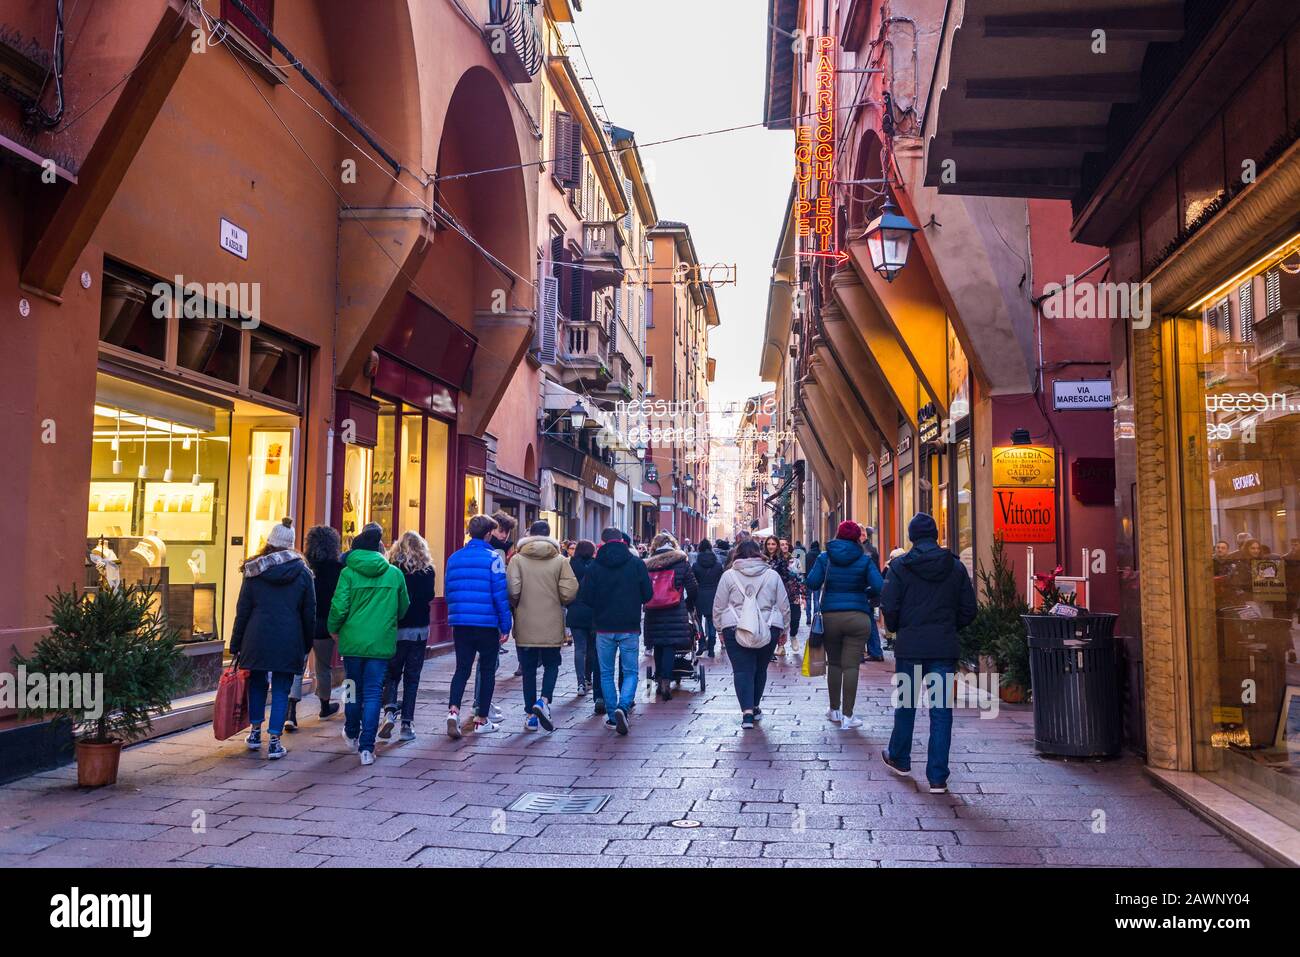 Bologna, Italy - December 2019 People walking in Via d'Azeglio, a famous street full of high end shops in the characteristic medieval city centre of B Stock Photo